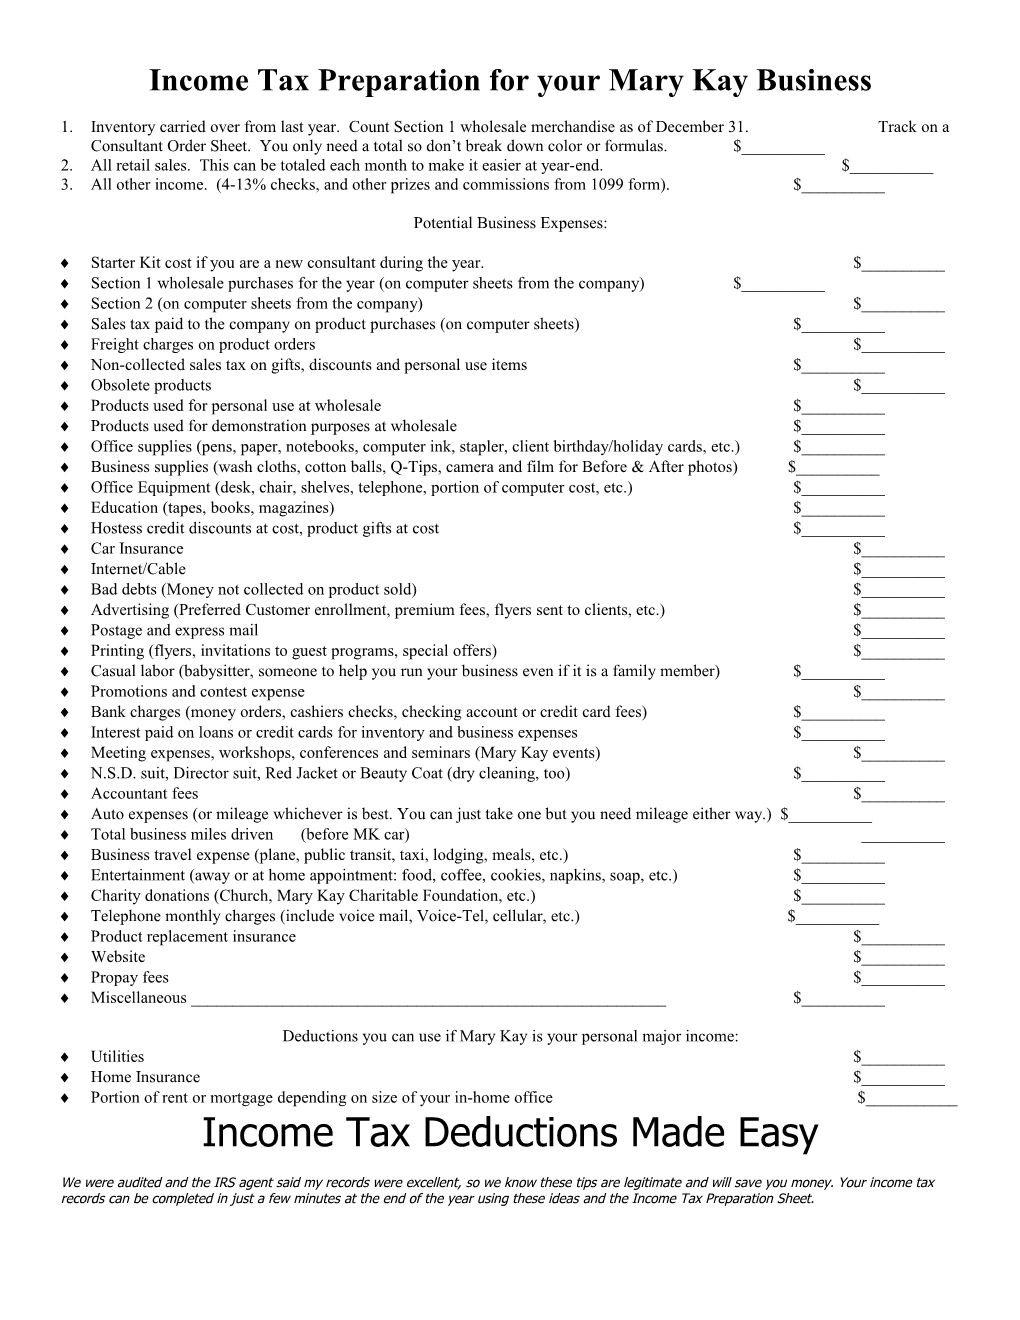 Income Tax Preparation for Your Mary Kay Business